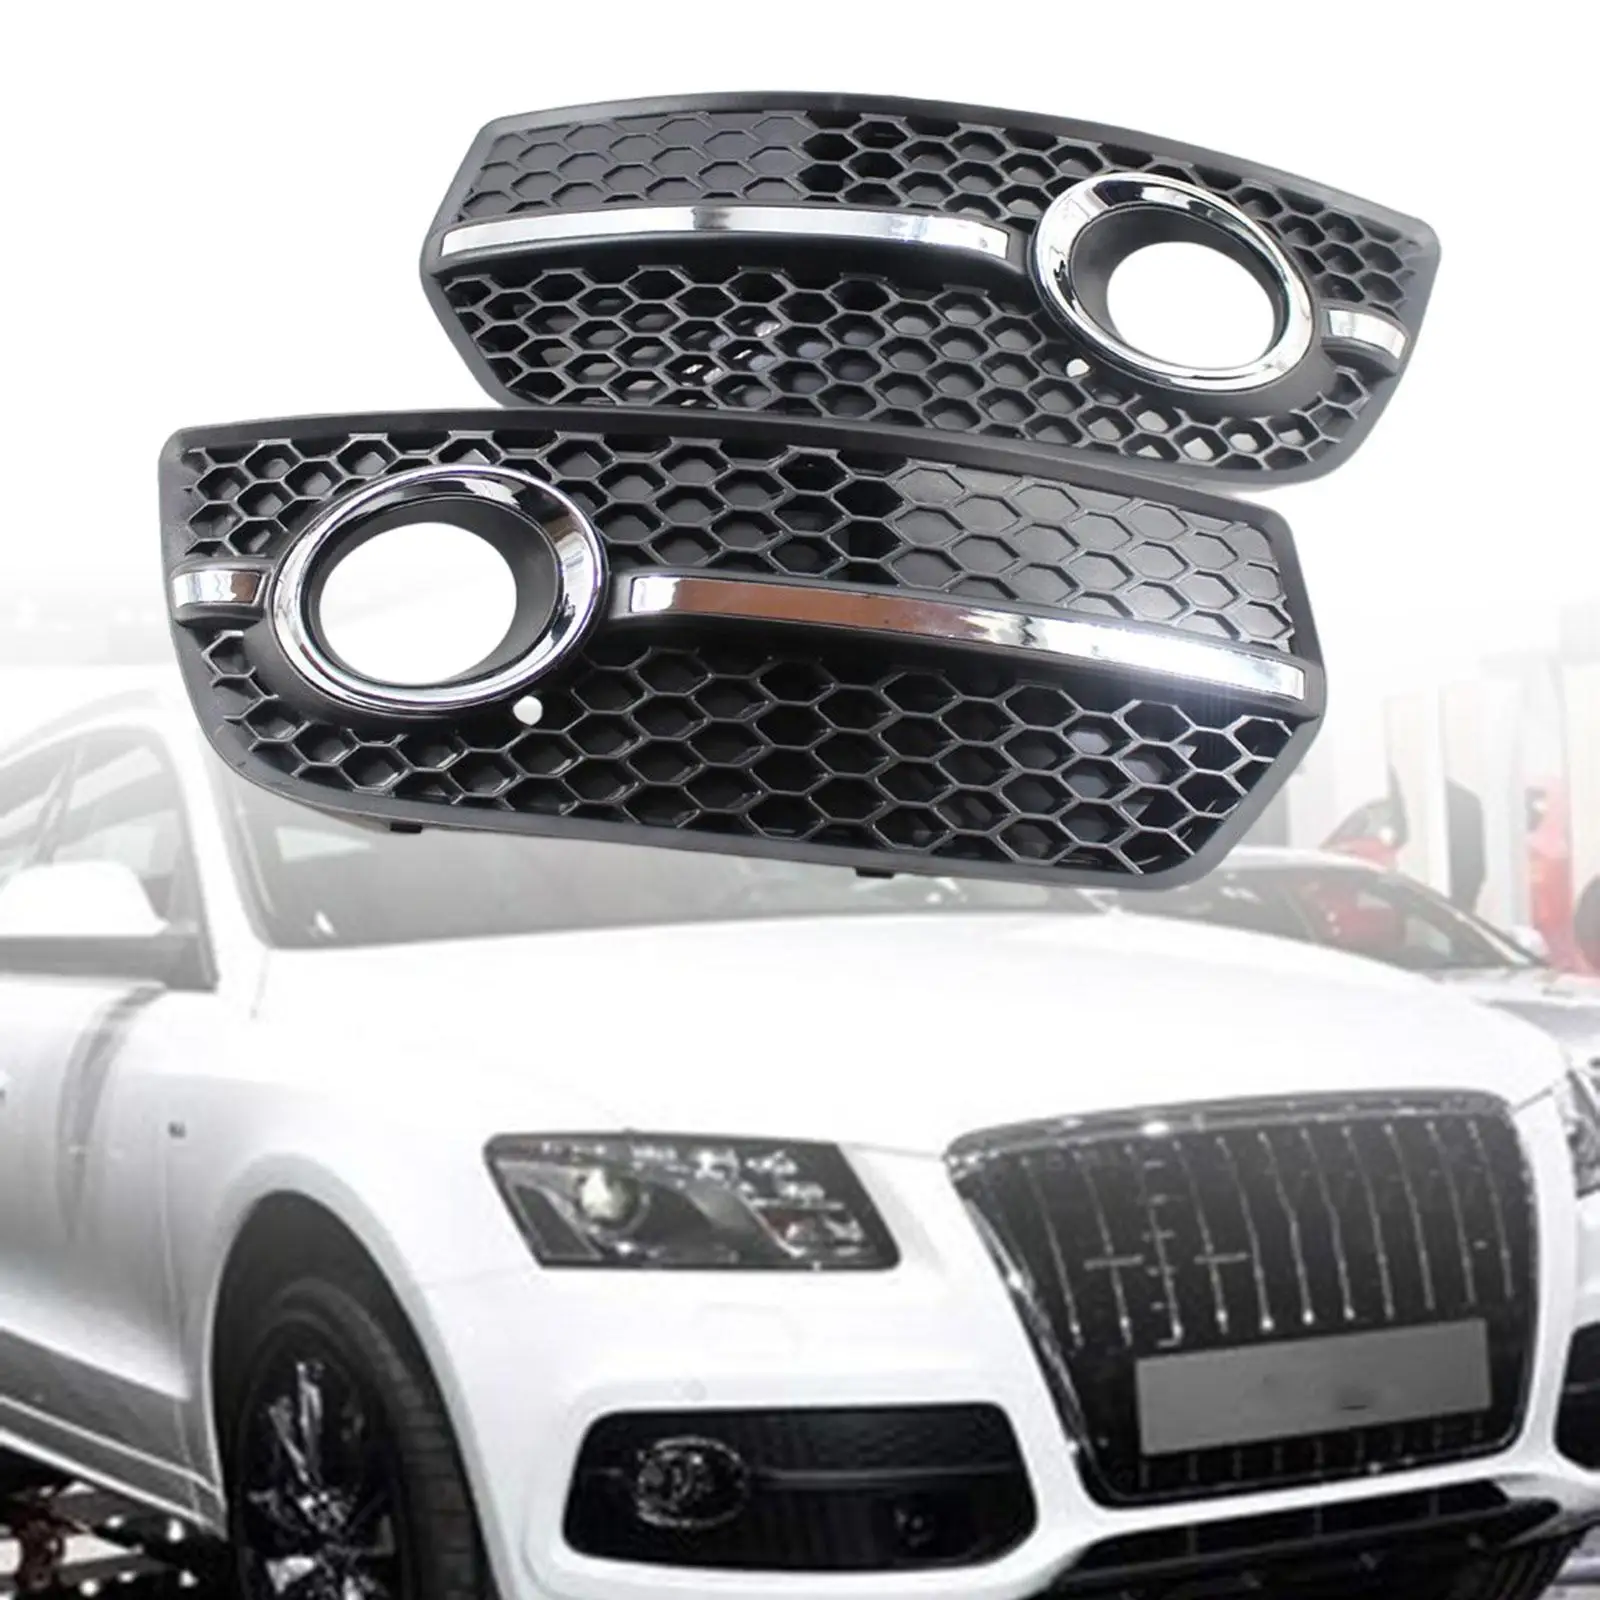 2x Front Lower Bumper Fog Light Lamp Cover Trims Grill for Audi Q5 09-12